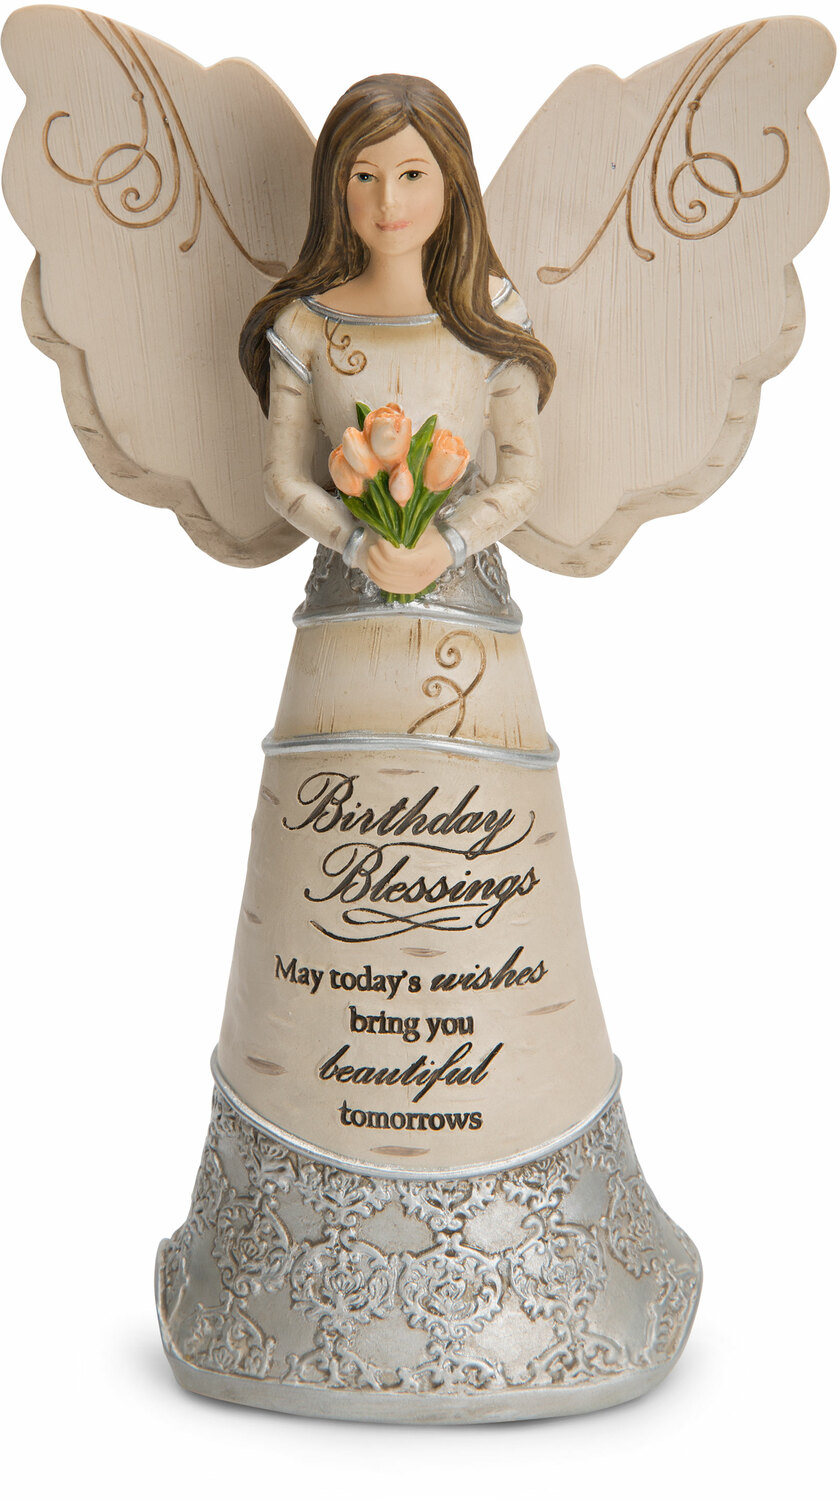 Birthday Blessings by Elements - Birthday Blessings - 6" Angel Holding Tulips